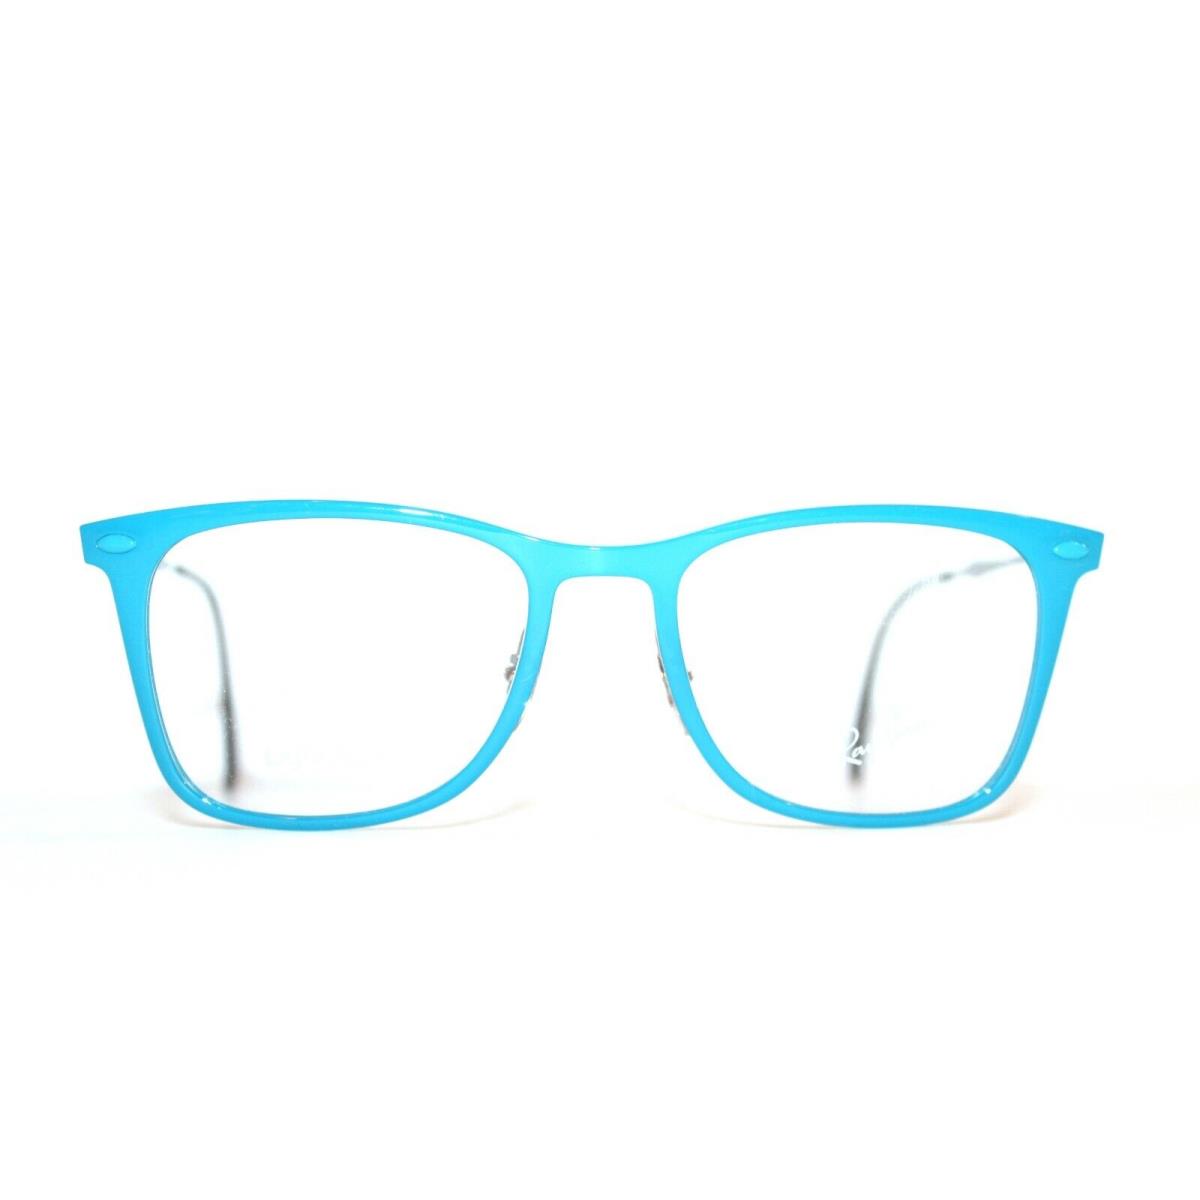 Ray Ban RB 7086 5640 Lightray Blue Eyeglasses RX 49-18-140 Italy - Frame: Blue